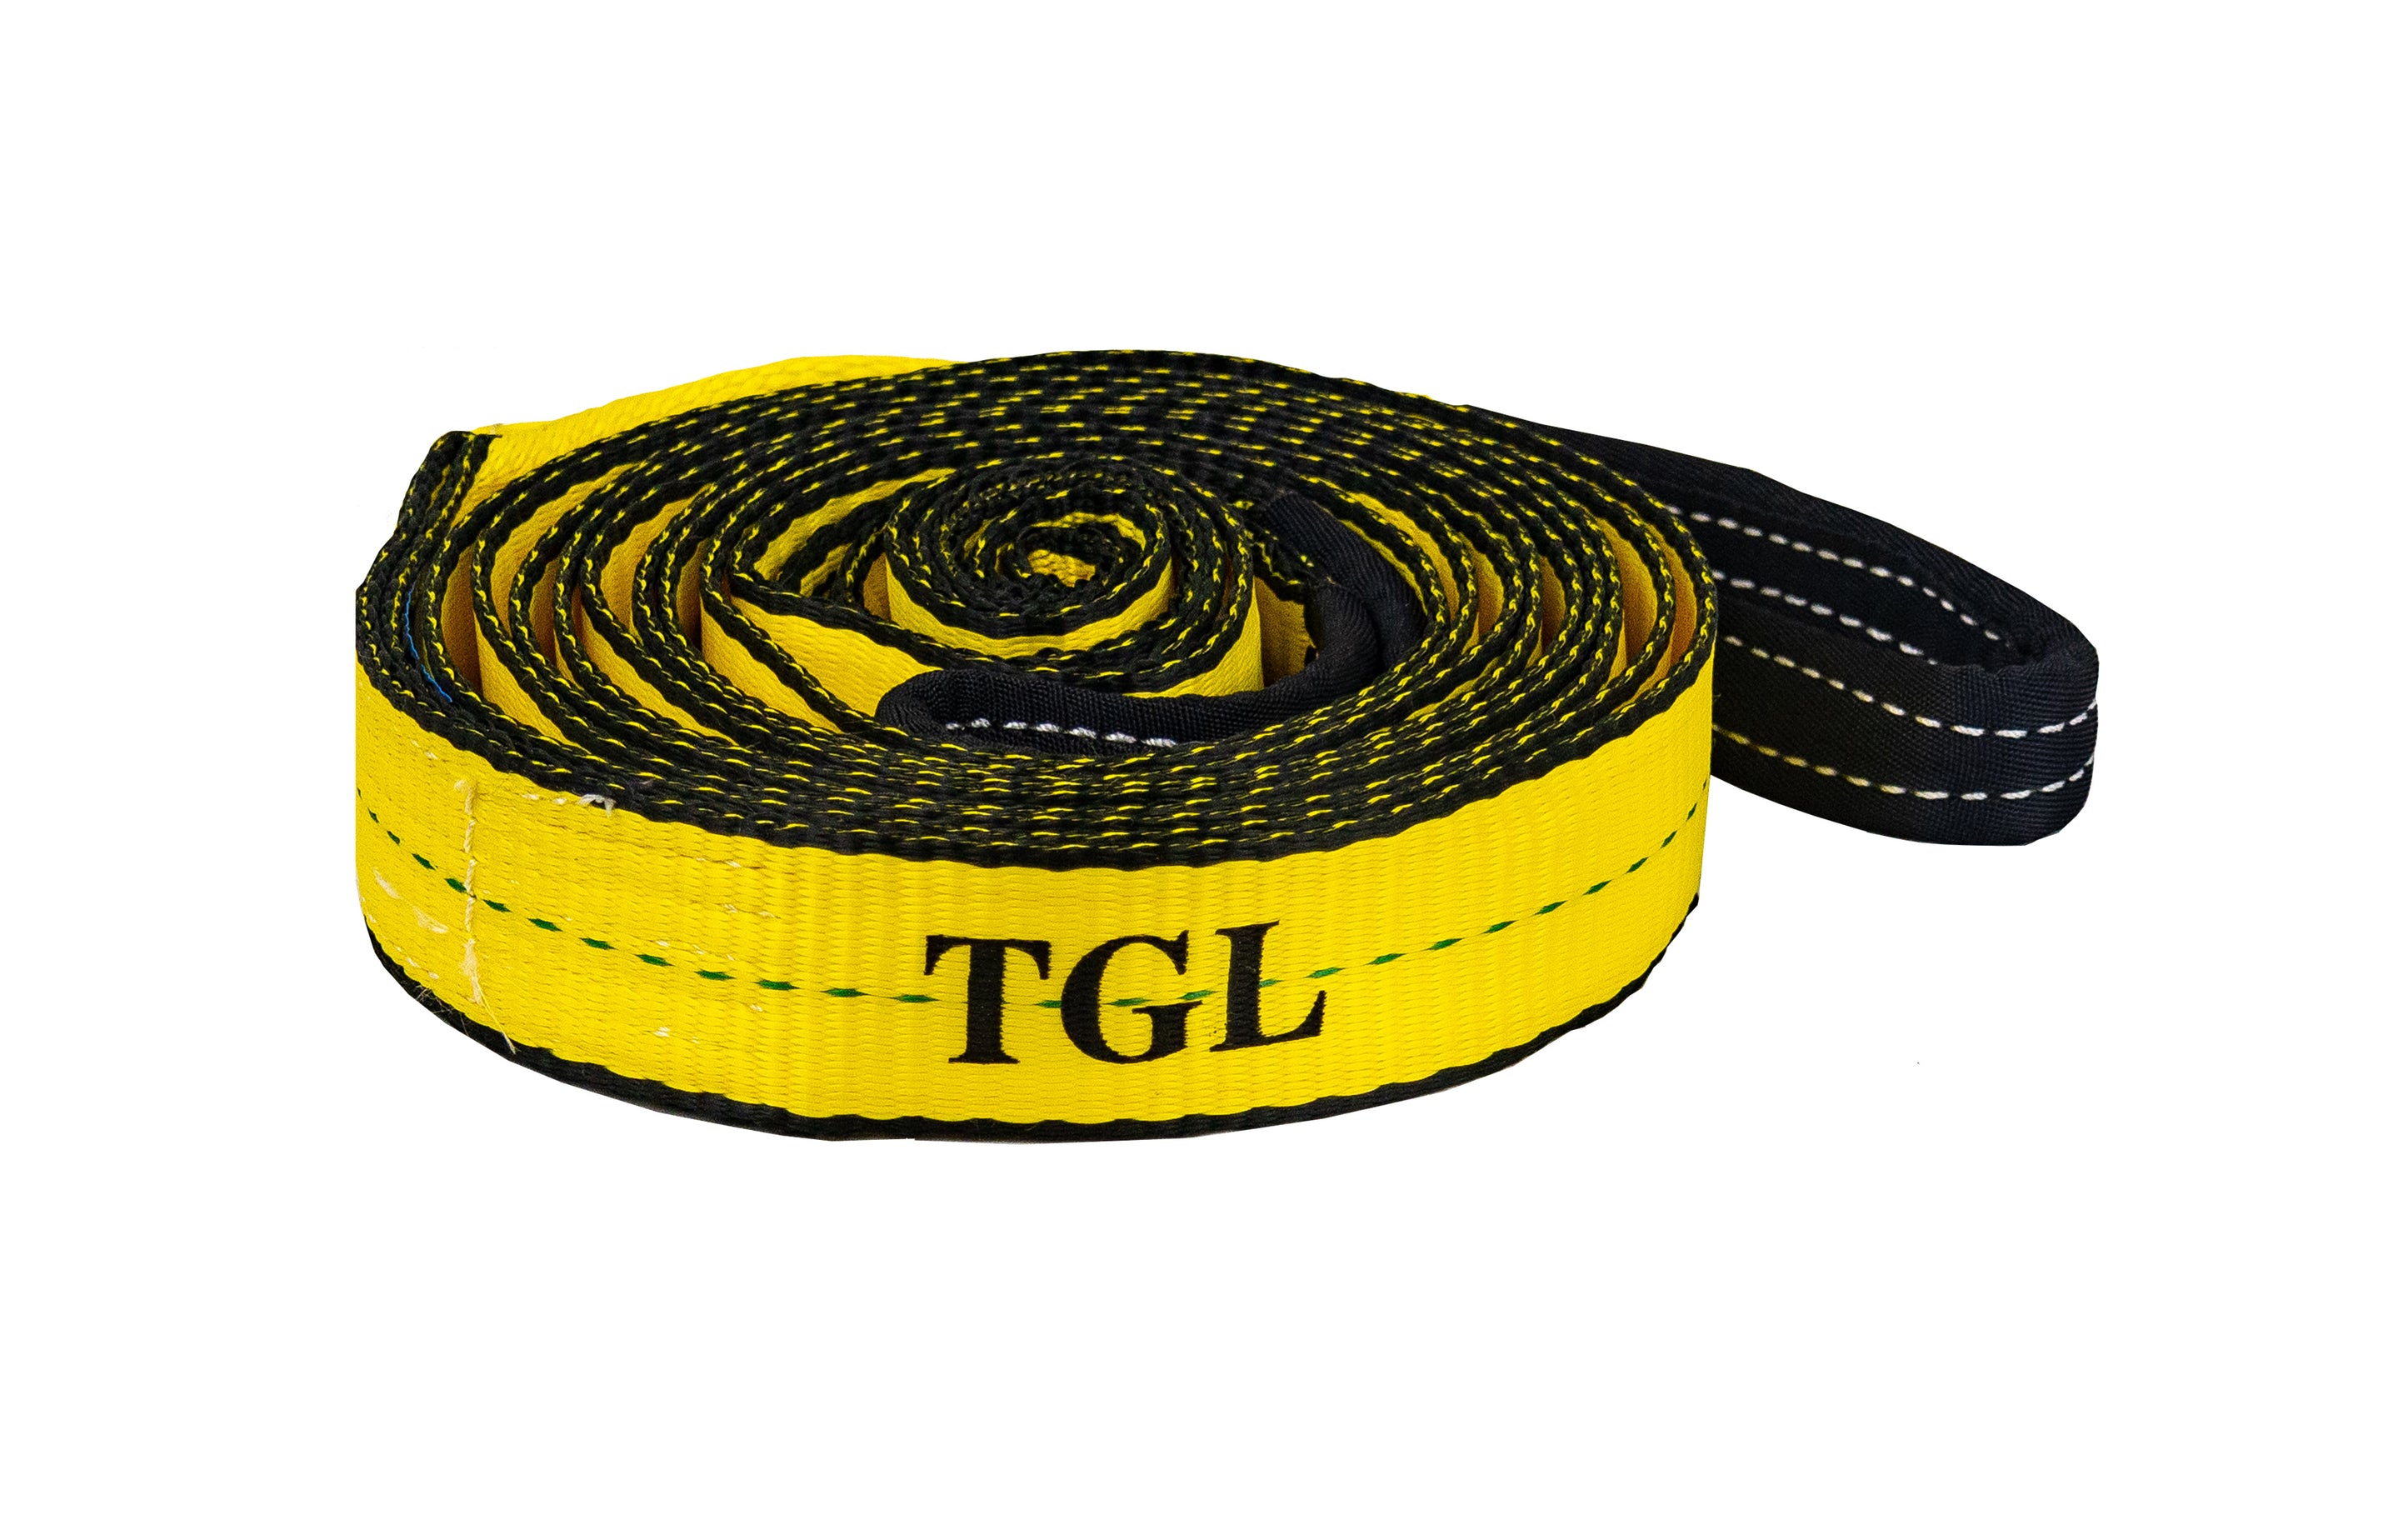 TGL 2 inch, 20 foot Tow Strap with Reinforced Loops 10,000 Pound Capac ...